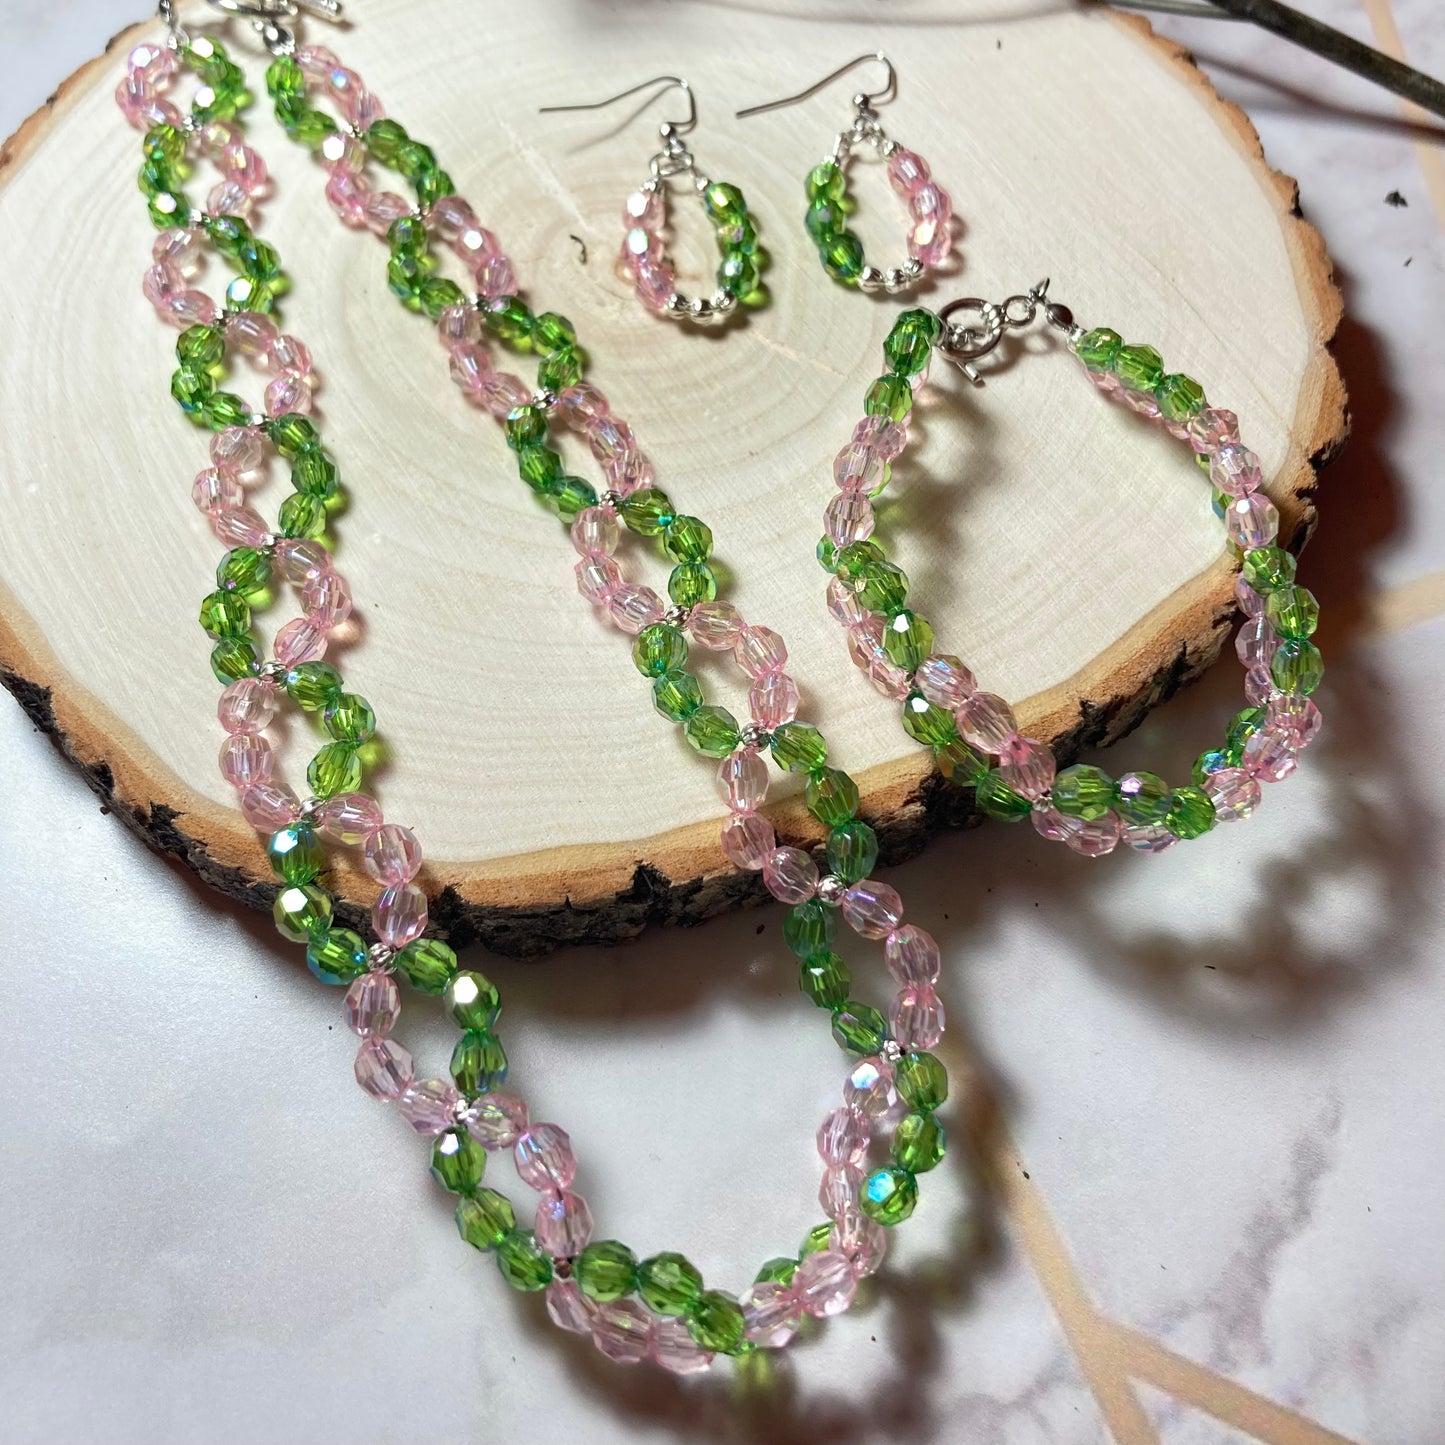 S24-PW1 - Pink & Green Twisted Jewelry Set